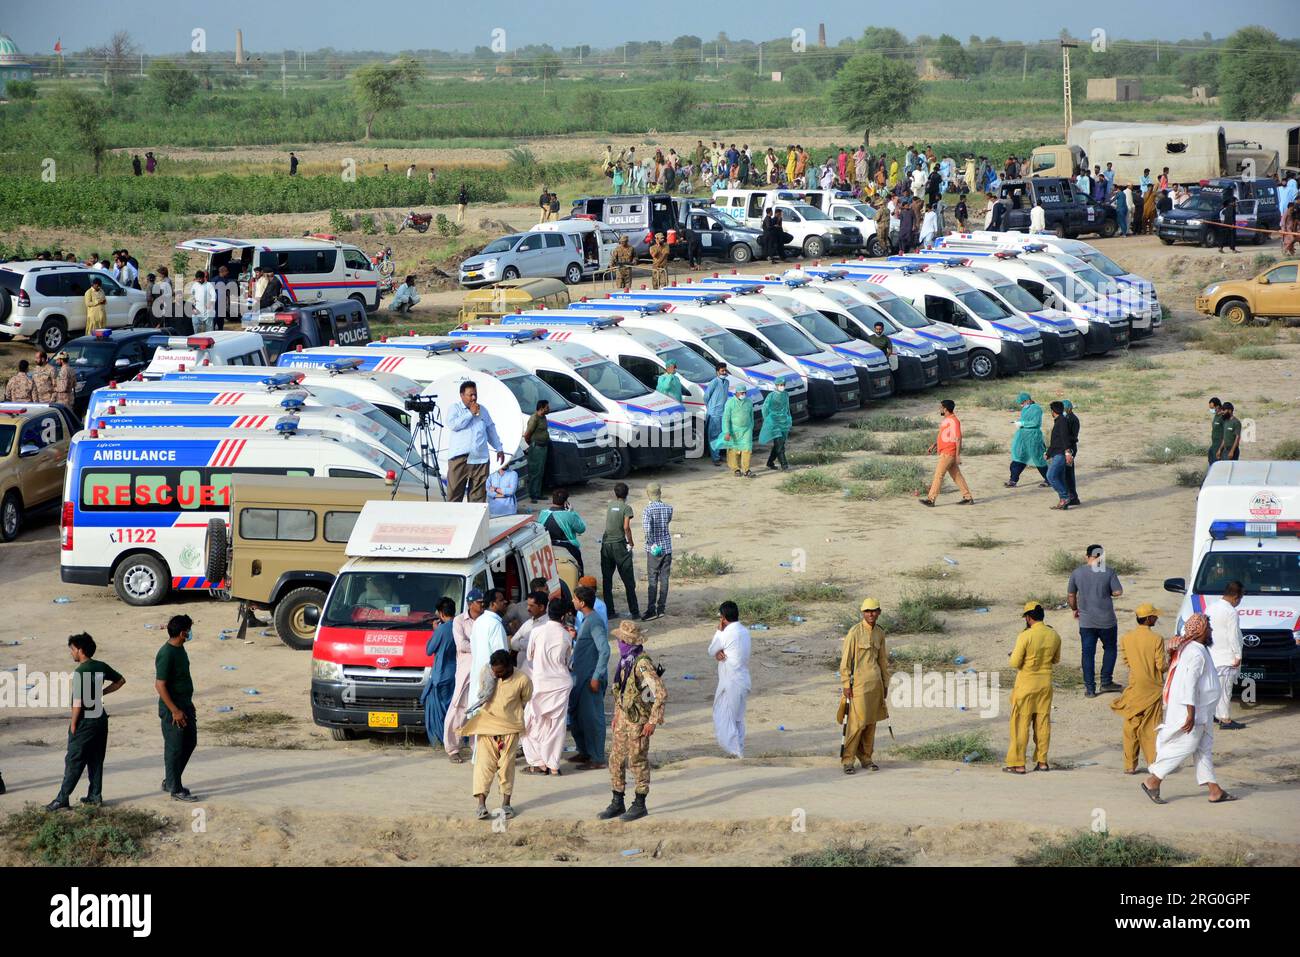 (230807) -- SANGHAR, Aug. 7, 2023 (Xinhua) -- Ambulances park at the site of a train accident in Sanghar district of Pakistan's southern Sindh province, on Aug. 6, 2023. At least 22 people were killed and over 50 others injured on Sunday after a passenger train derailed in the Sanghar district of Pakistan's southern Sindh province, local police said.The accident took place when 10 coaches of the Hazara Express train derailed when it was crossing a canal bridge near Sarhari town in the Shahdadpur area of the district, Muhammad Younis Chandio, deputy inspector general of police of the region, to Stock Photo